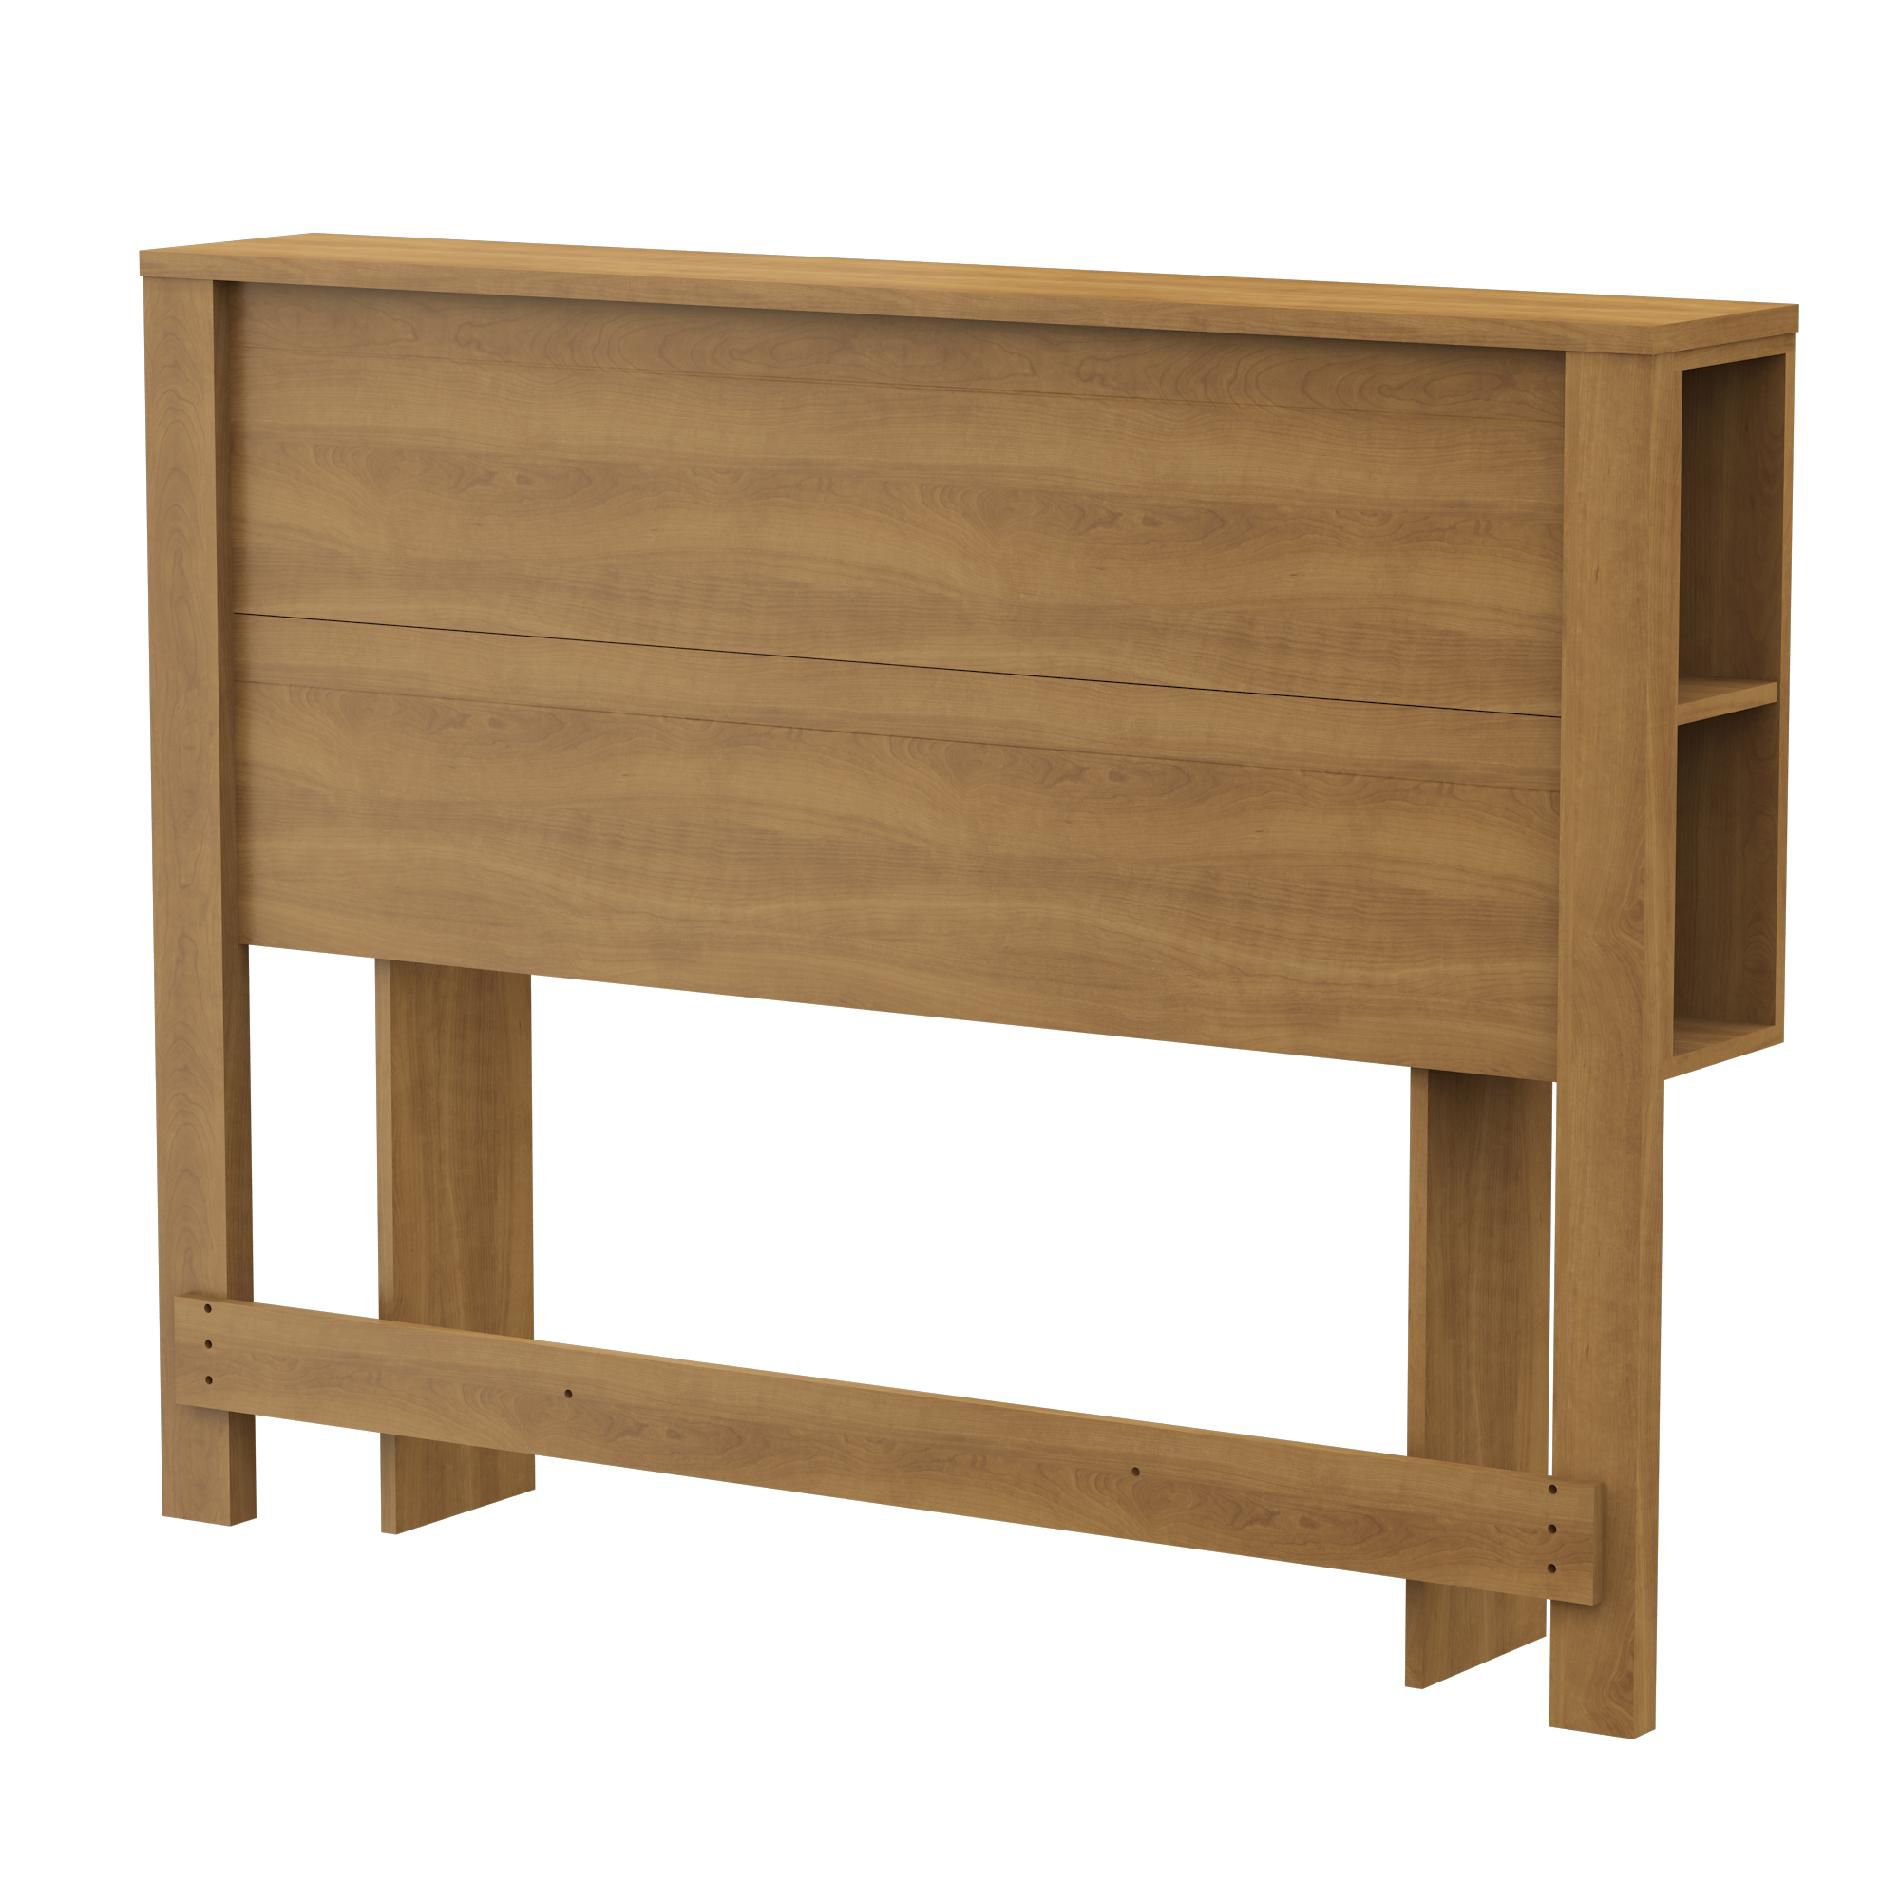 South Shore Fynn Twin Headboard with Storage - Harvest Maple